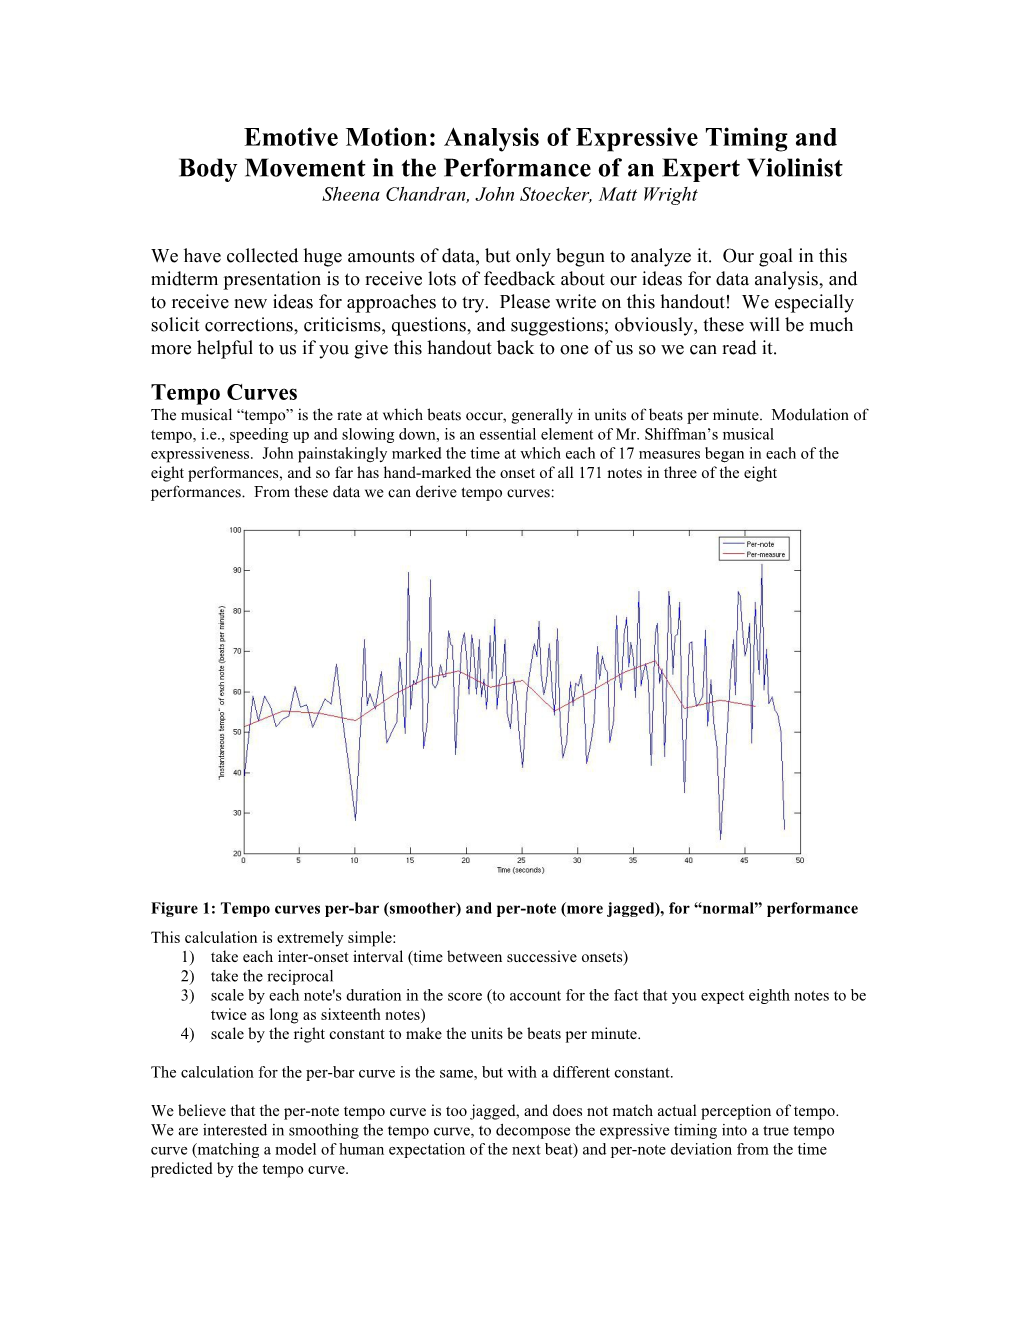 Emotive Motion: Analysis of Expressive Timing and Body Movement in the Performance Of